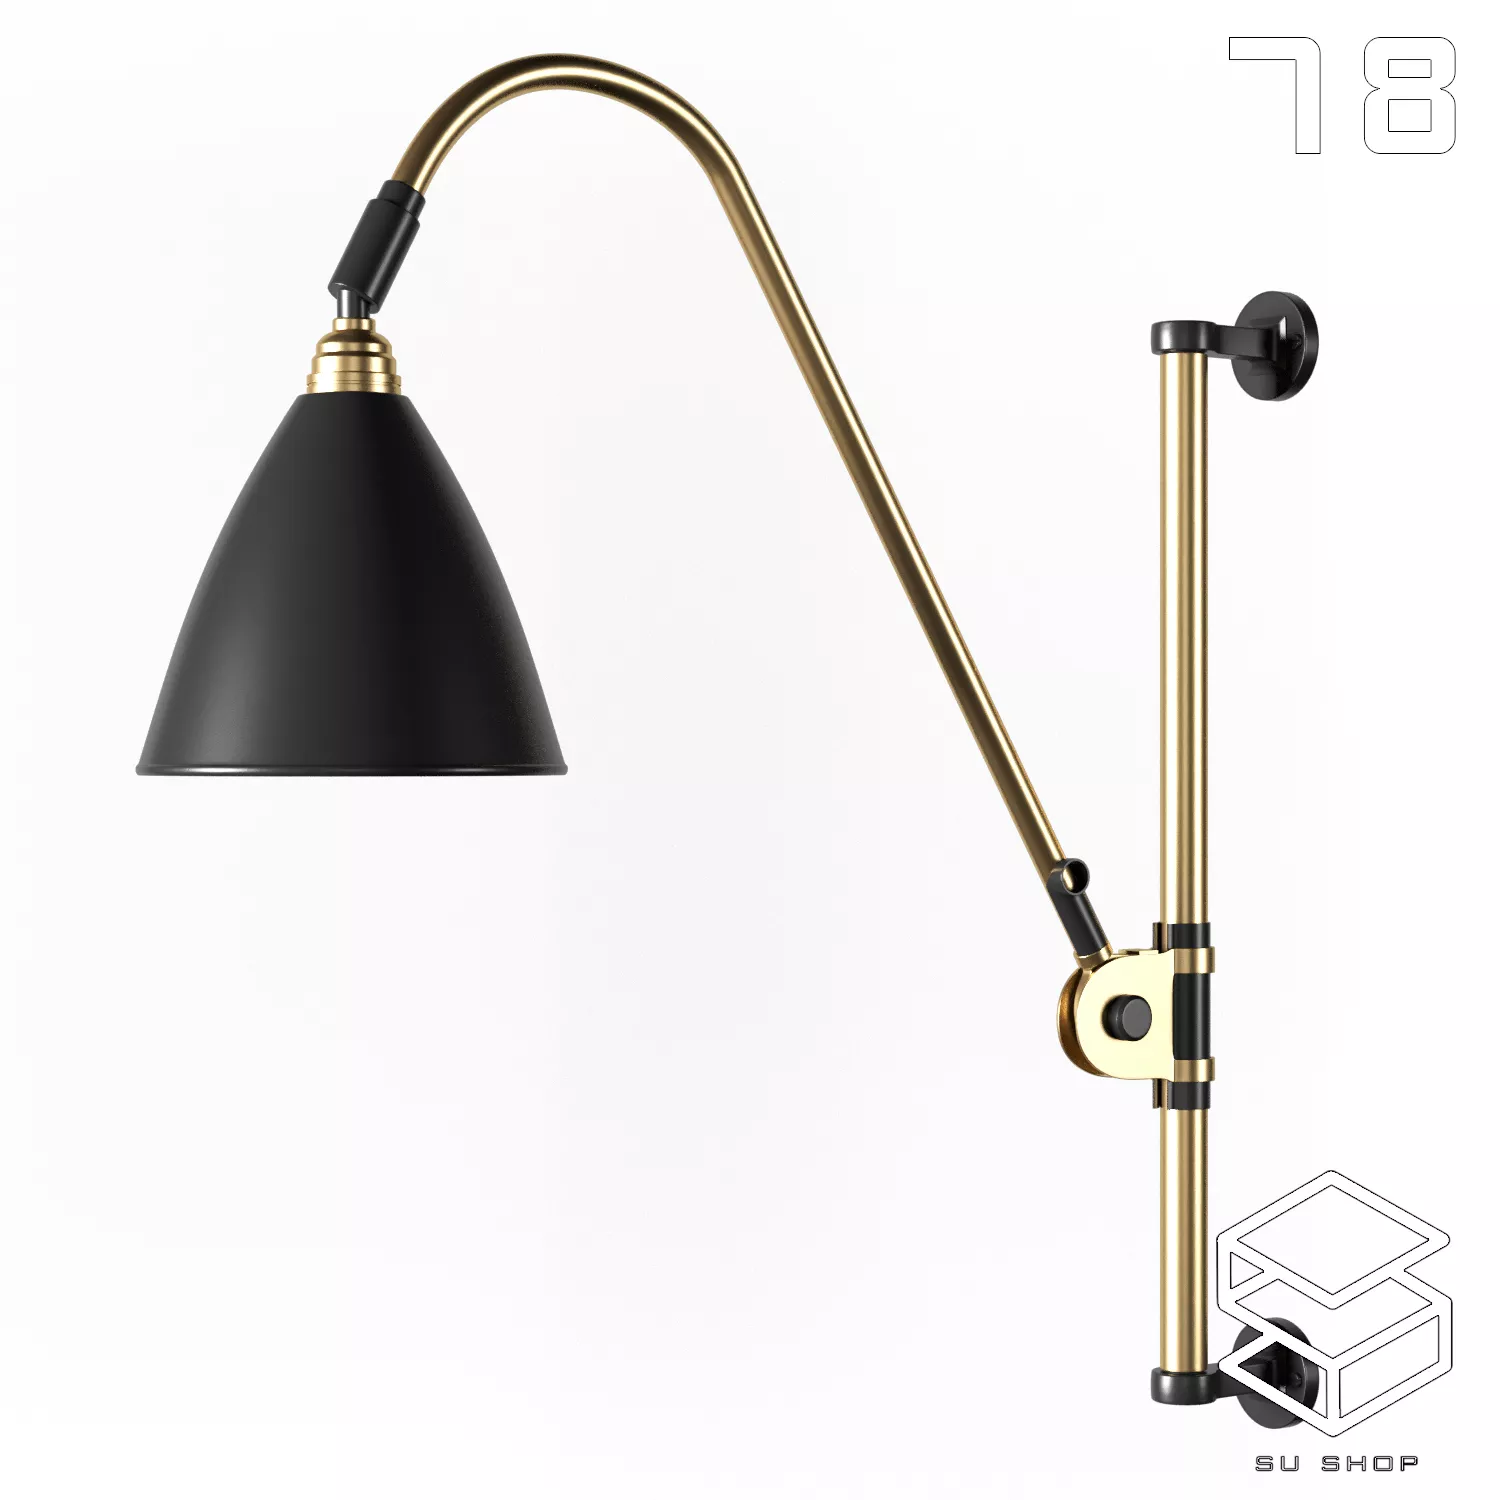 MODERN WALL LAMP - SKETCHUP 3D MODEL - VRAY OR ENSCAPE - ID16334